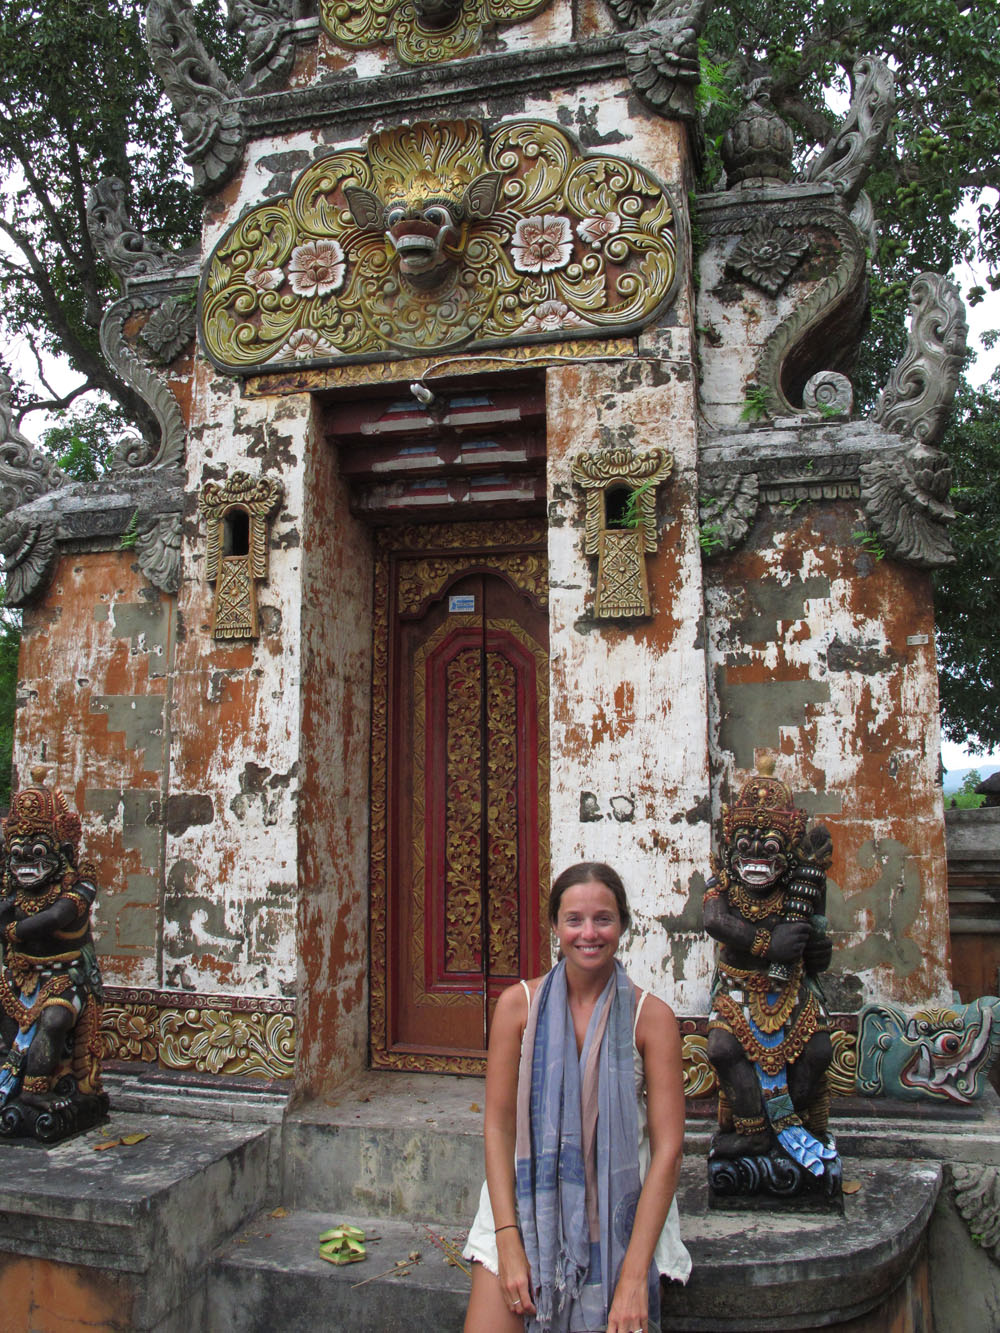 Me at an abandoned temple on nusa lembongan